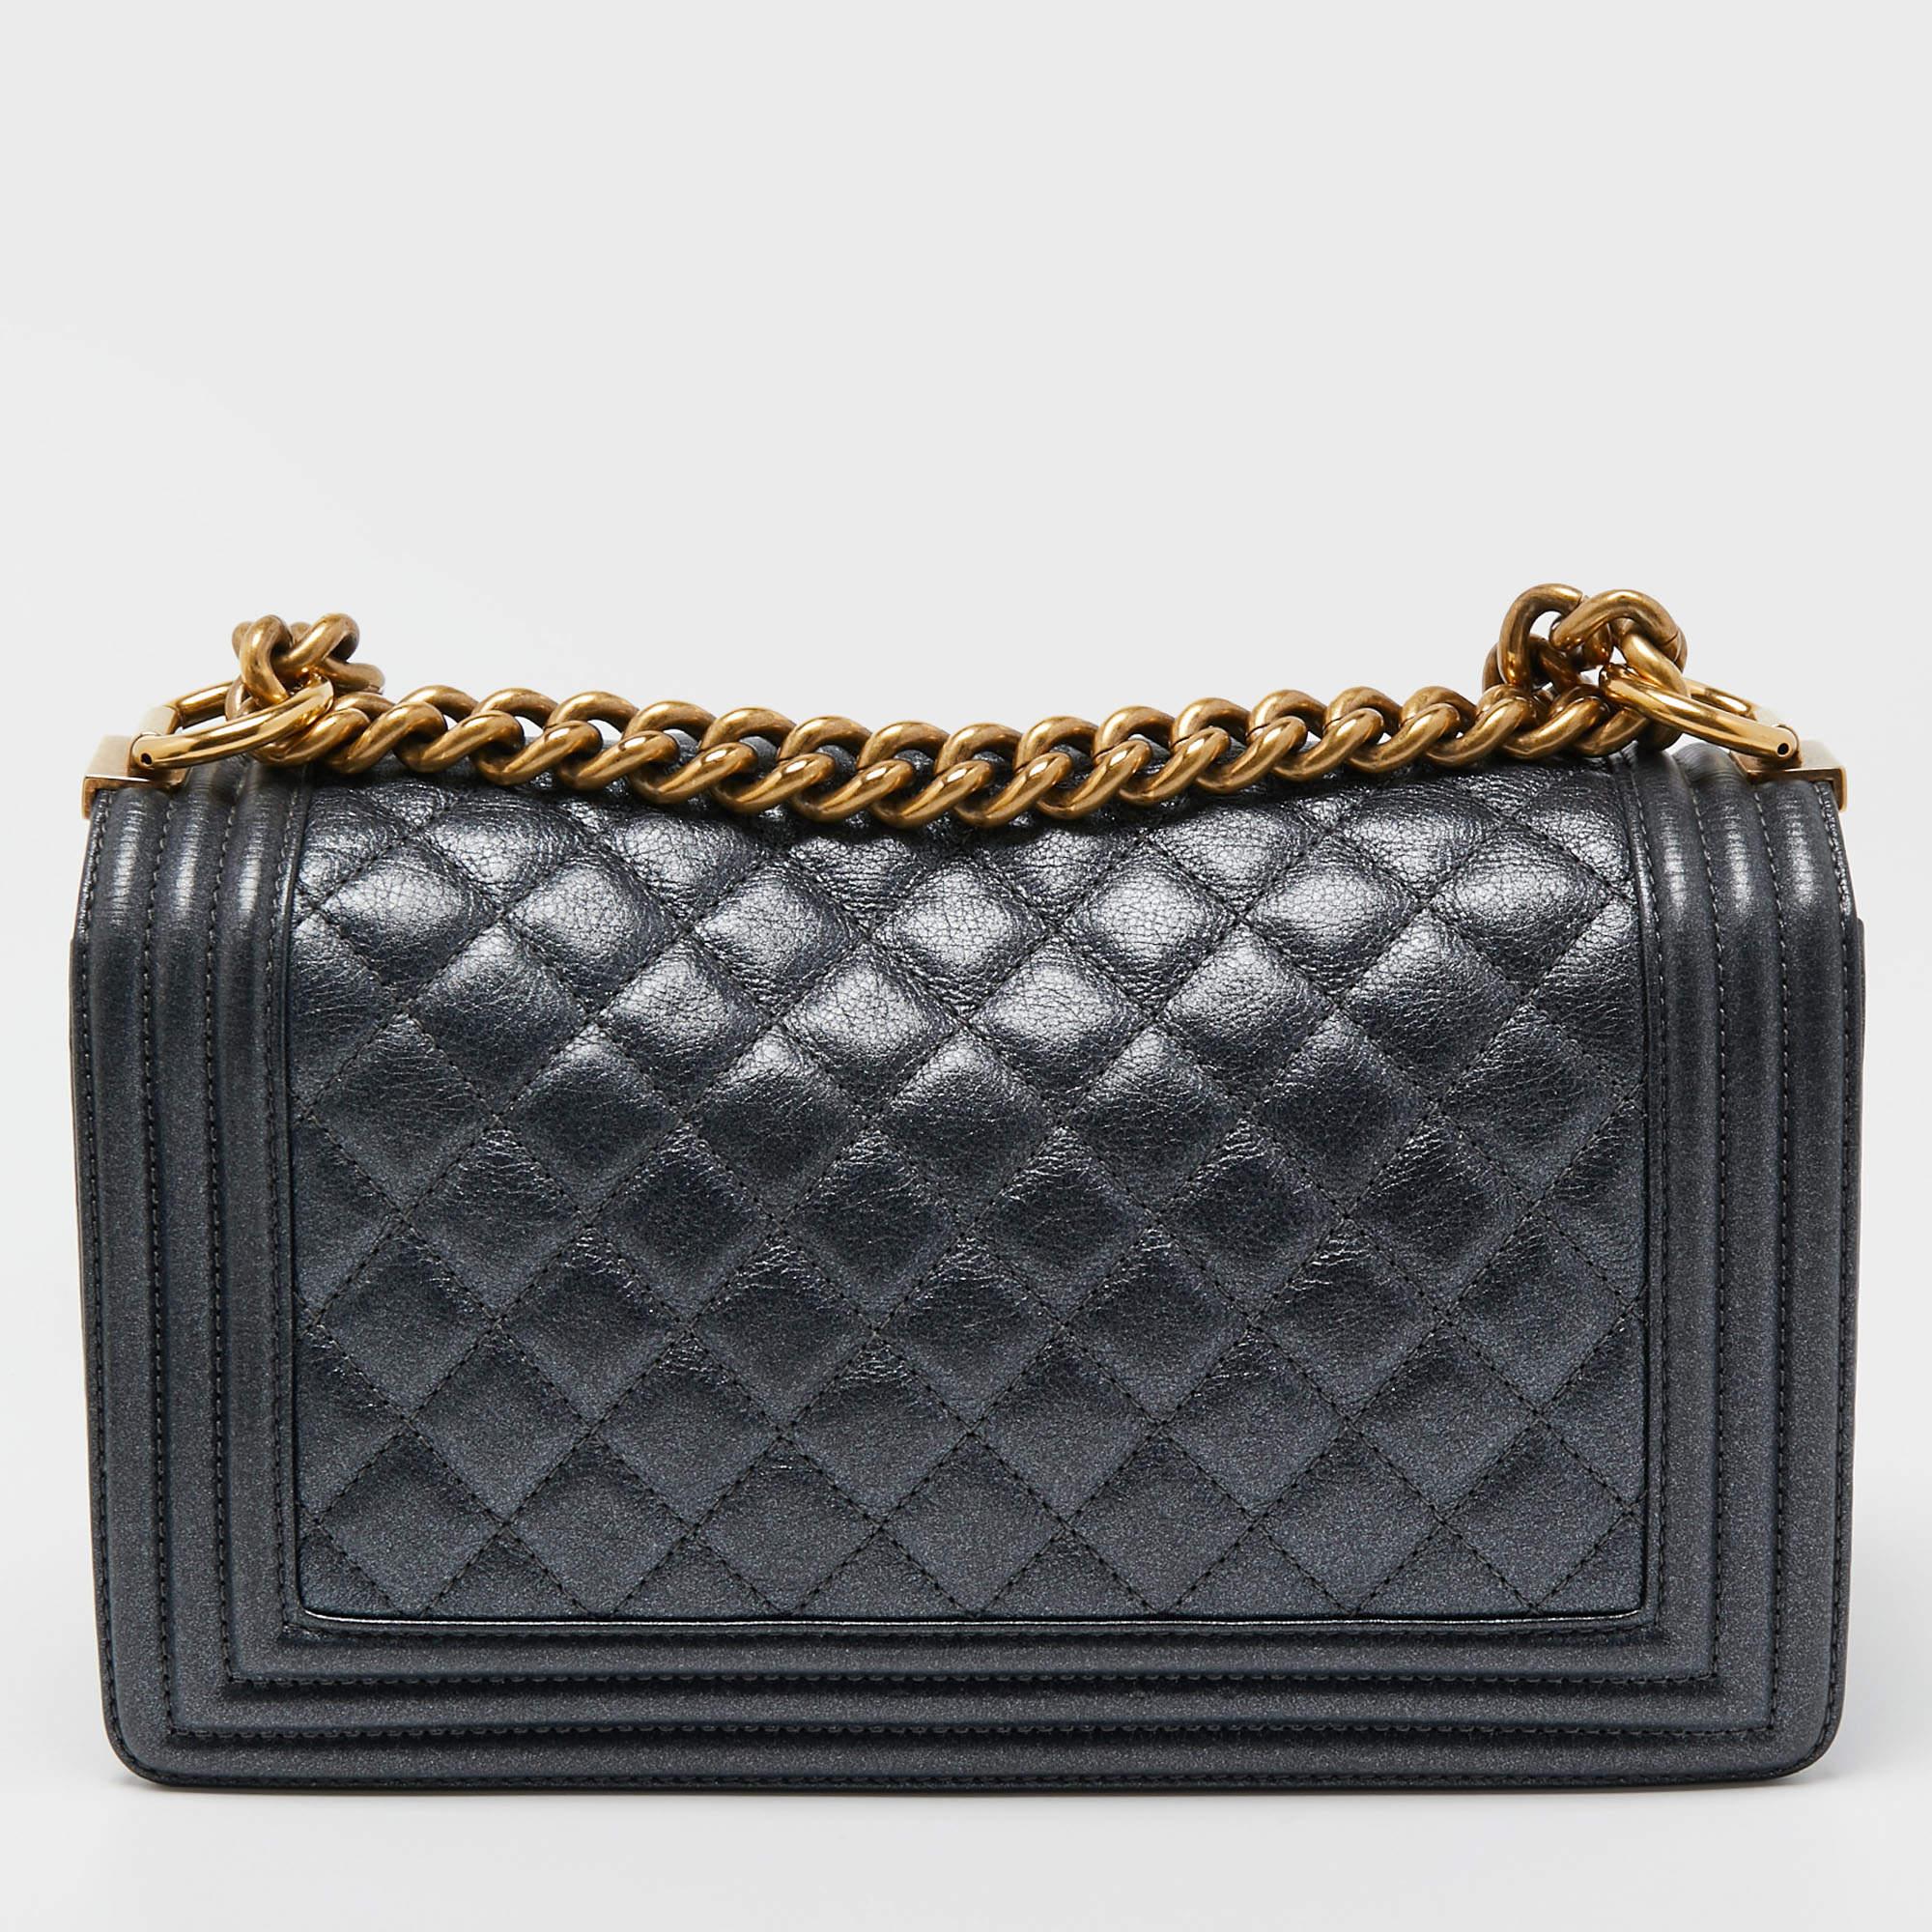 Known for creating exclusive, meticulously crafted, instantly recognizable fashion items, Chanel is a brand coveted around the world. Indulge in the Chanel way of luxury with this pretty bag.

Includes: Original Dustbag

